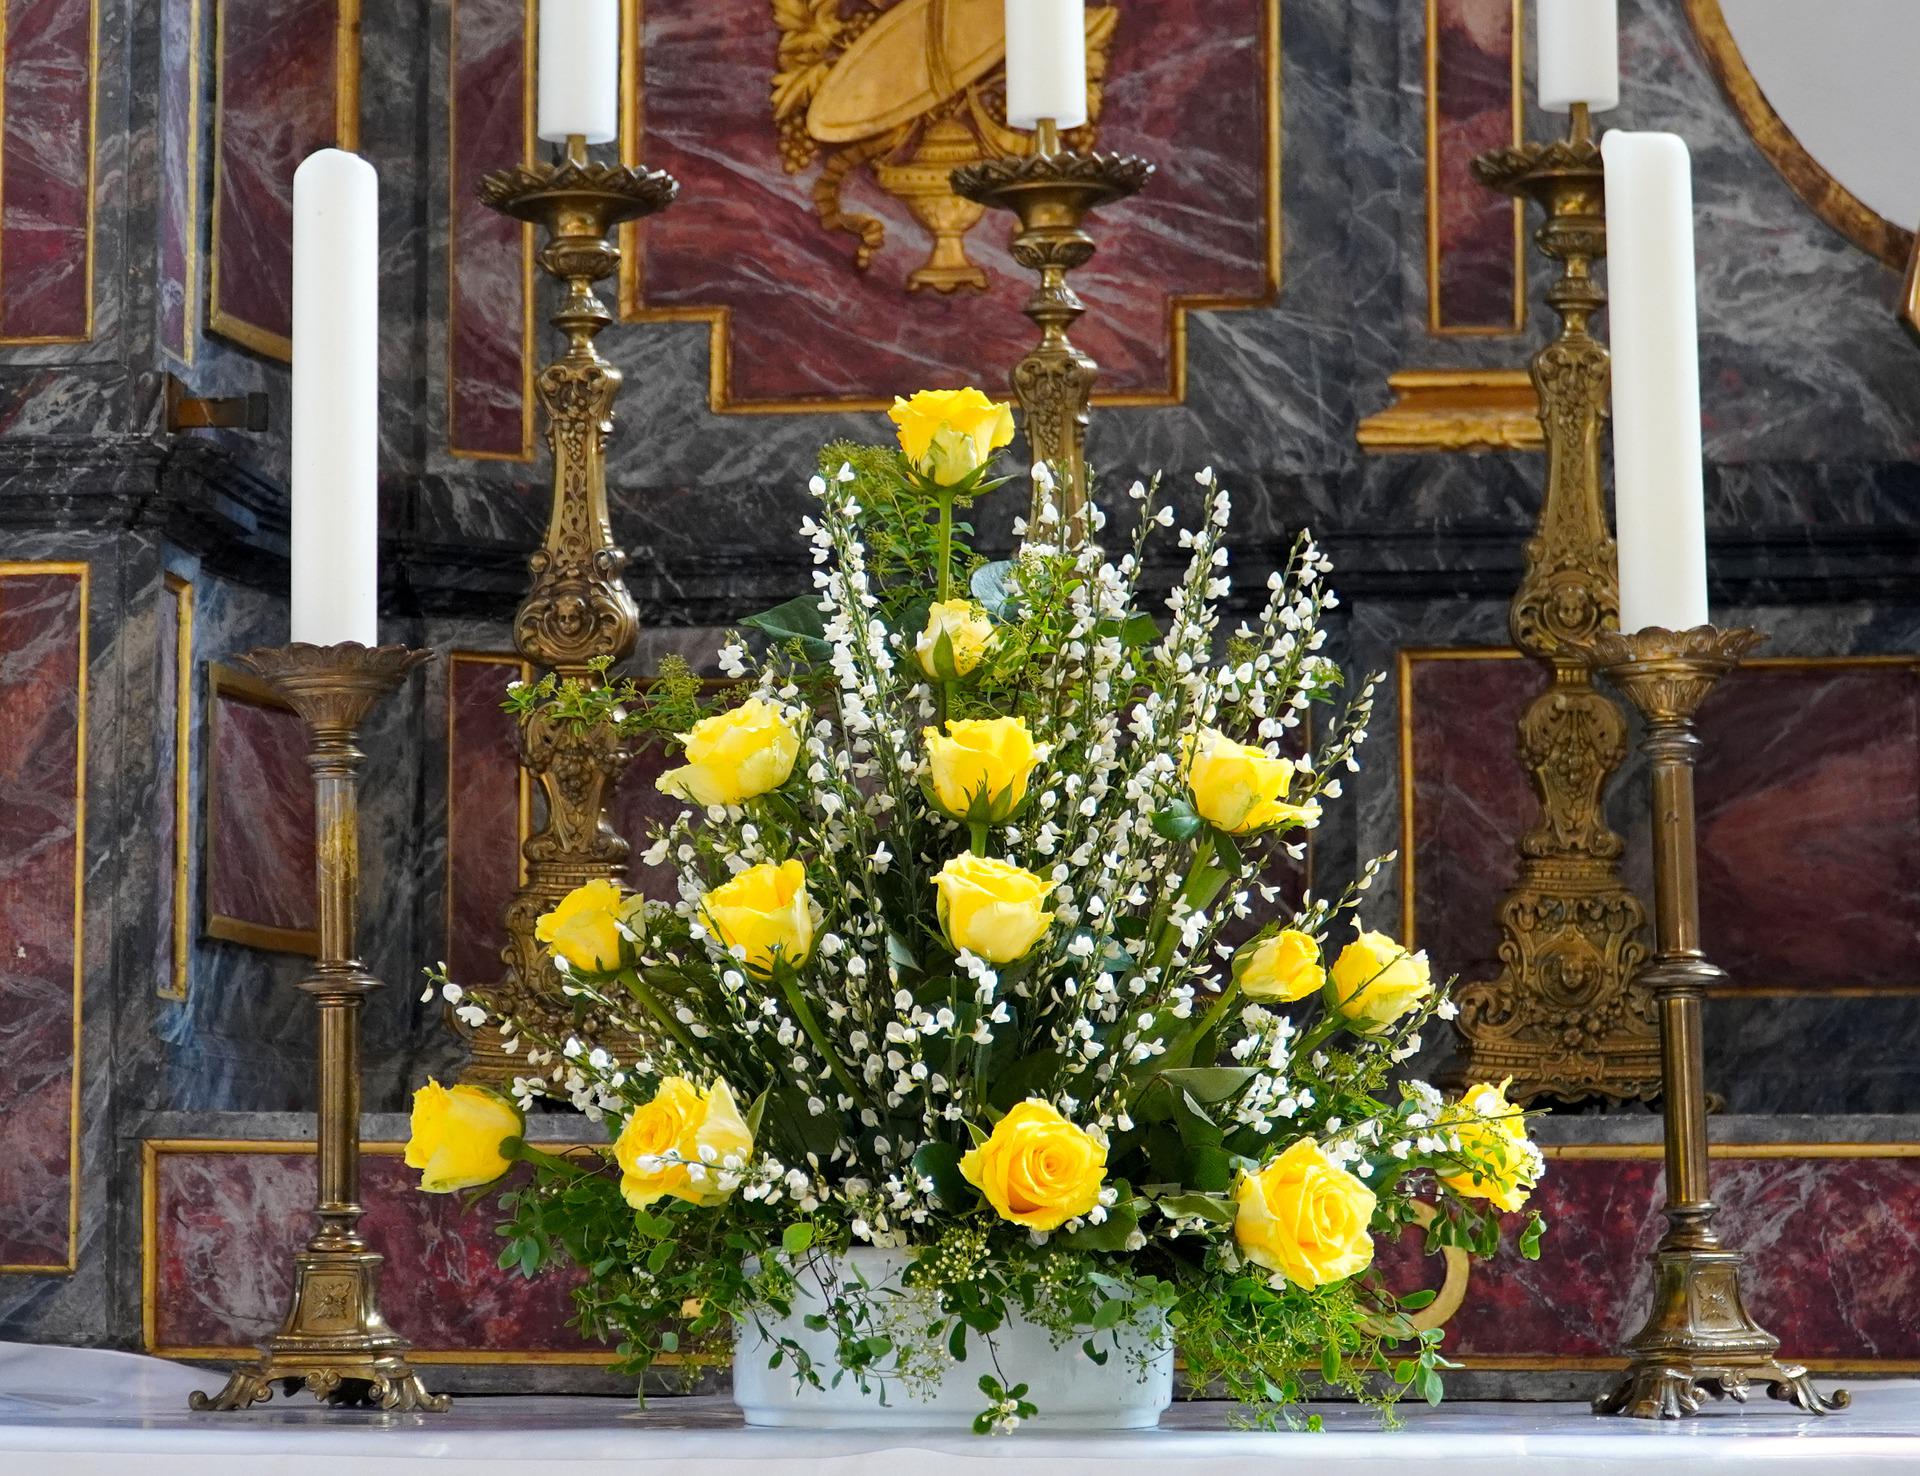 June adorned her altar with her favorite yellow roses, praying for her joy to last forever. | Source: Pixabay